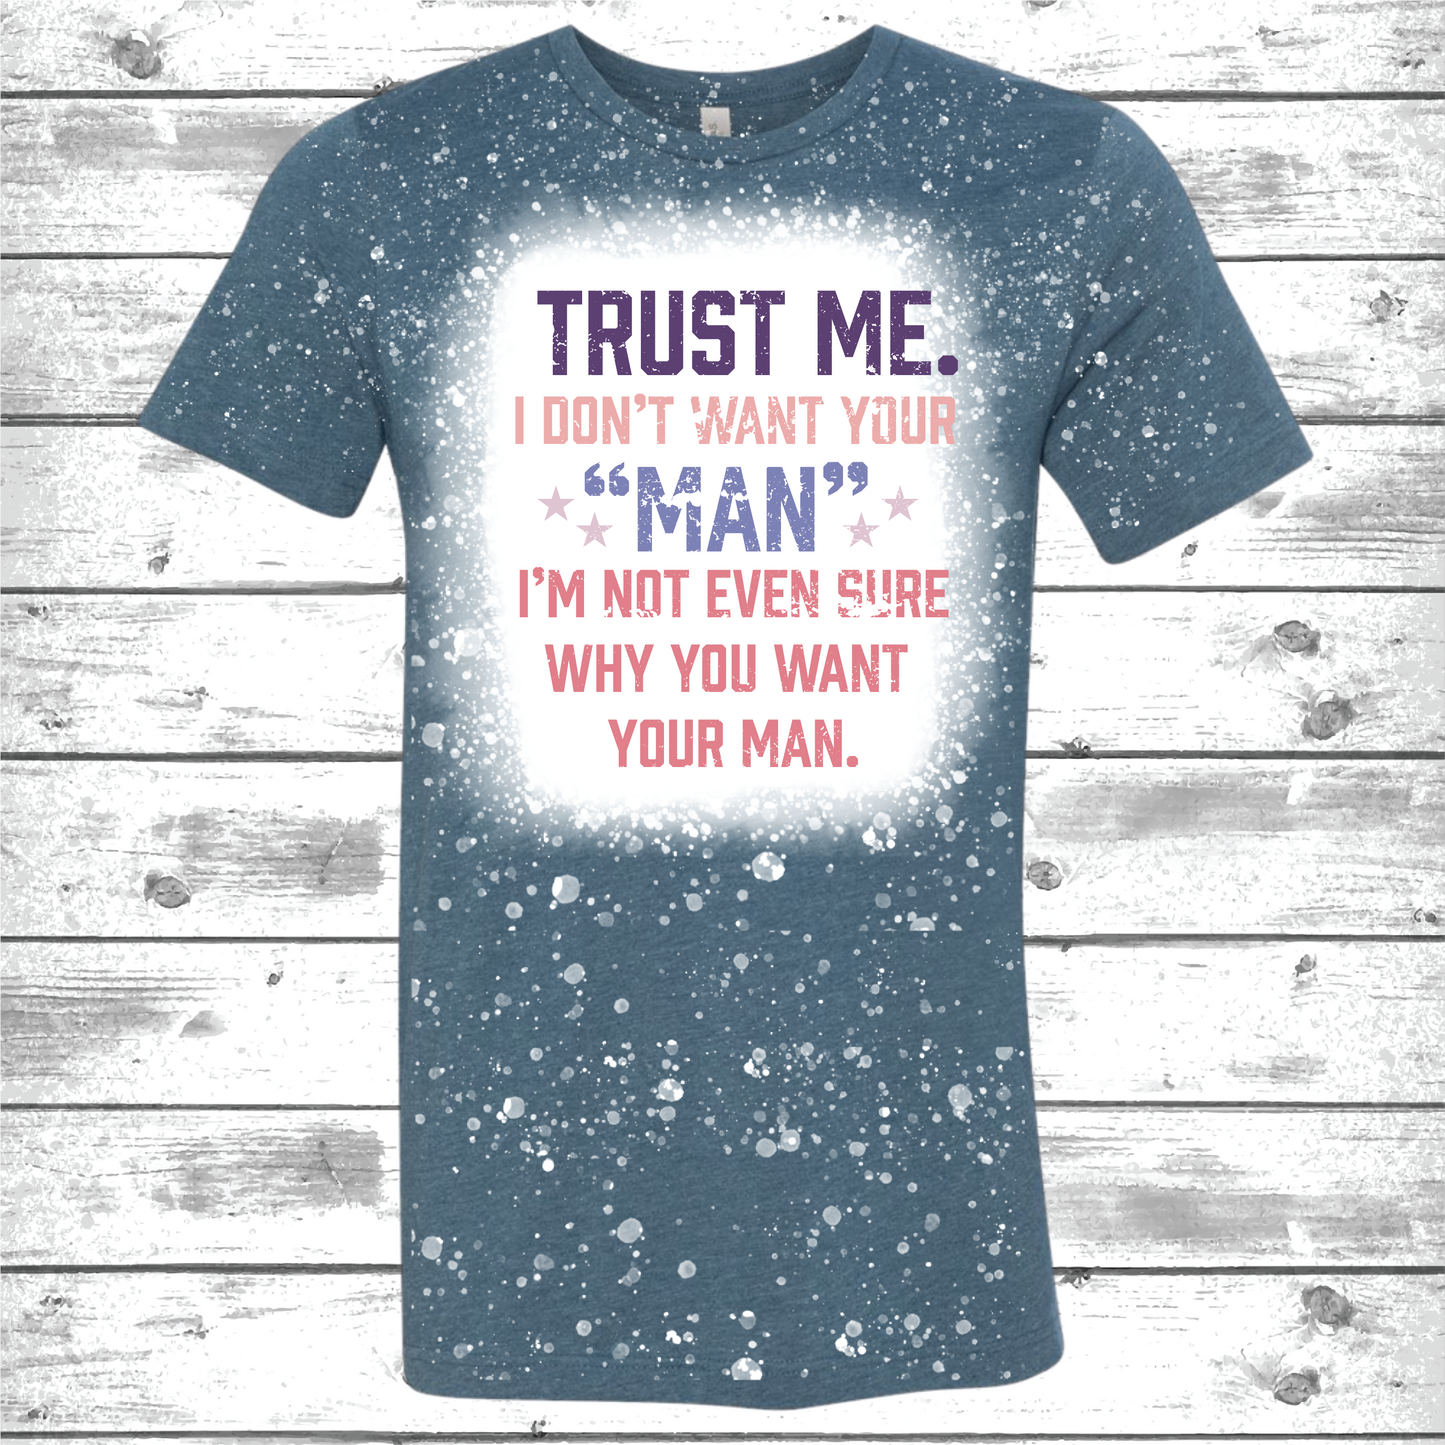 Trust Me, I don't want your man bleached graphic tee image